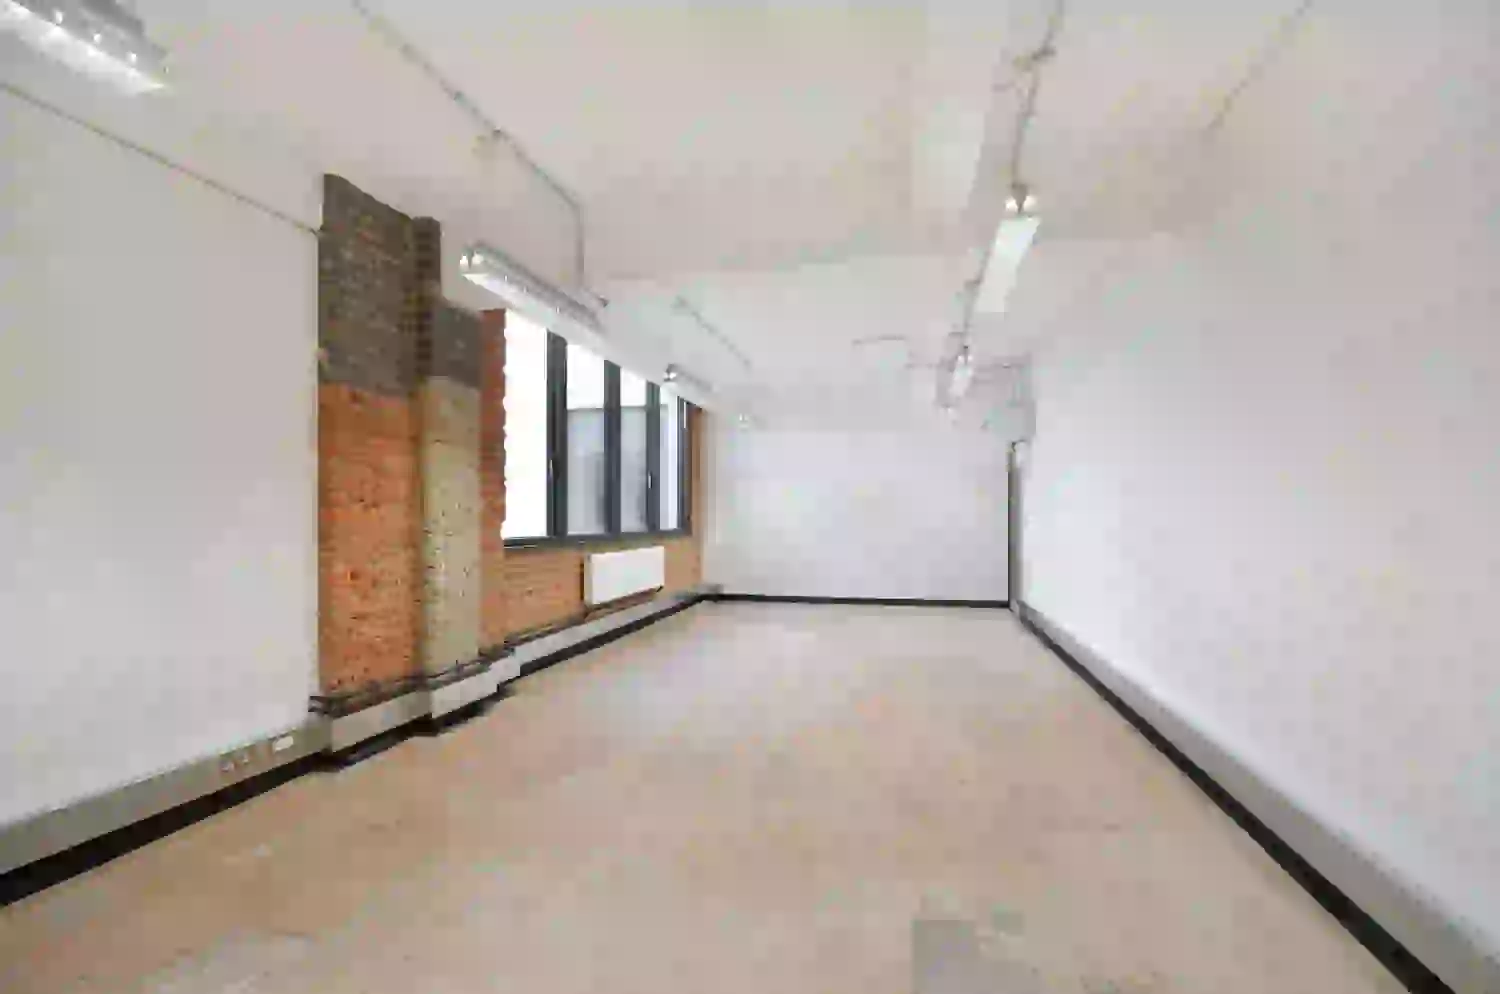 Office space to rent at Pill Box, 115 Coventry Road, Bethnal Green, London, unit PB.211, 449 sq ft (41 sq m).